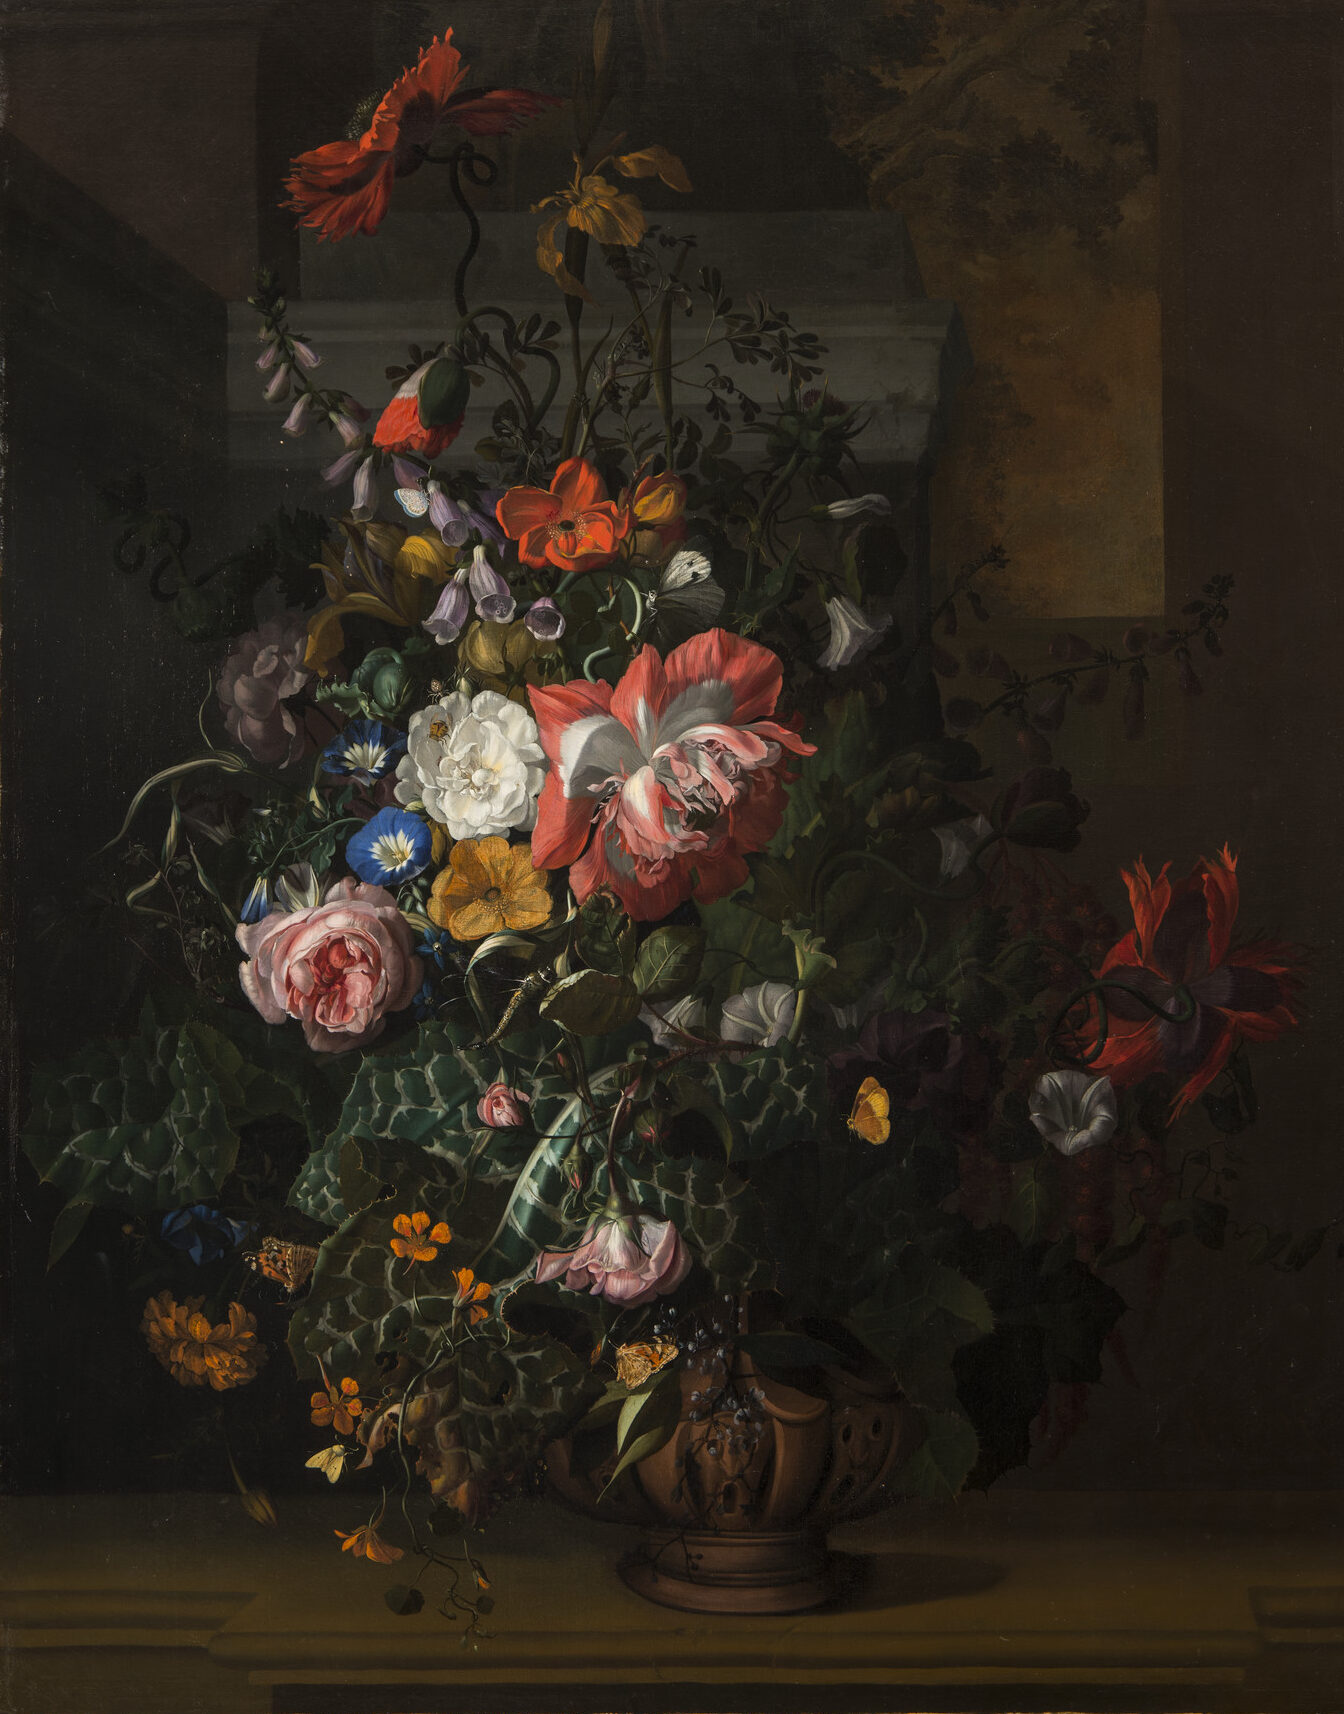 A still life painting featuring an asymmetrical arrangement of flowers; the central section features pink, orange, yellow, and blue flowers and is dramatically highlighted compared to the background and outer edge of arrangement.